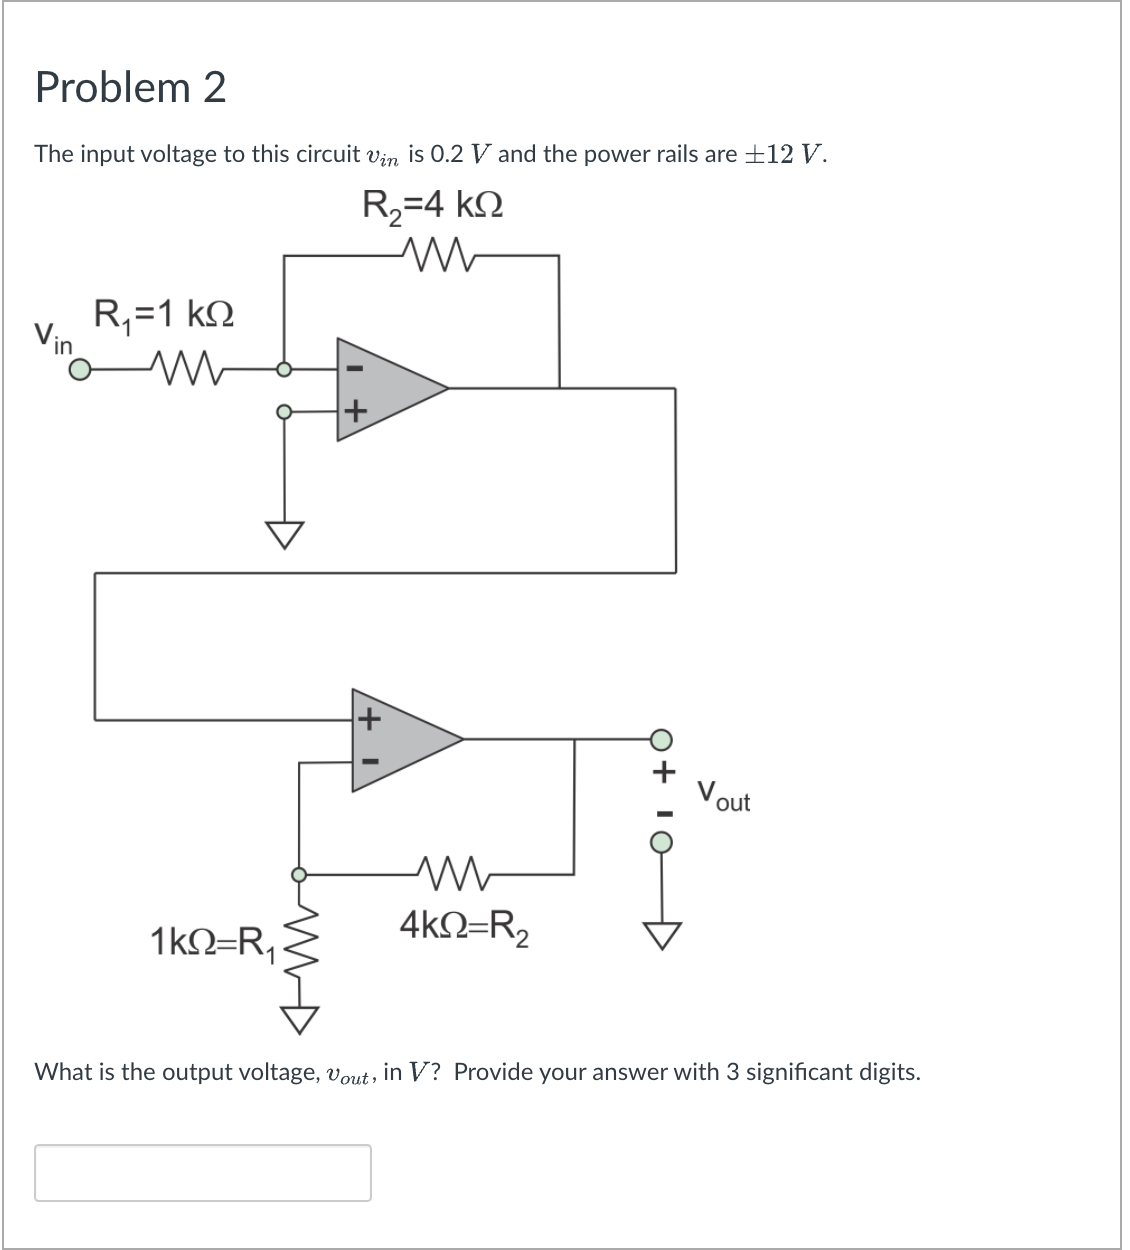 Problem 2
The input voltage to this circuit vin is 0.2 V and the power rails are +12 V.
R,=4 kN
R,=1 kN
Vin
out
1kN=R,
4kN=R,
What is the output voltage, vout, in V? Provide your answer with 3 significant digits.
Q+ 10
